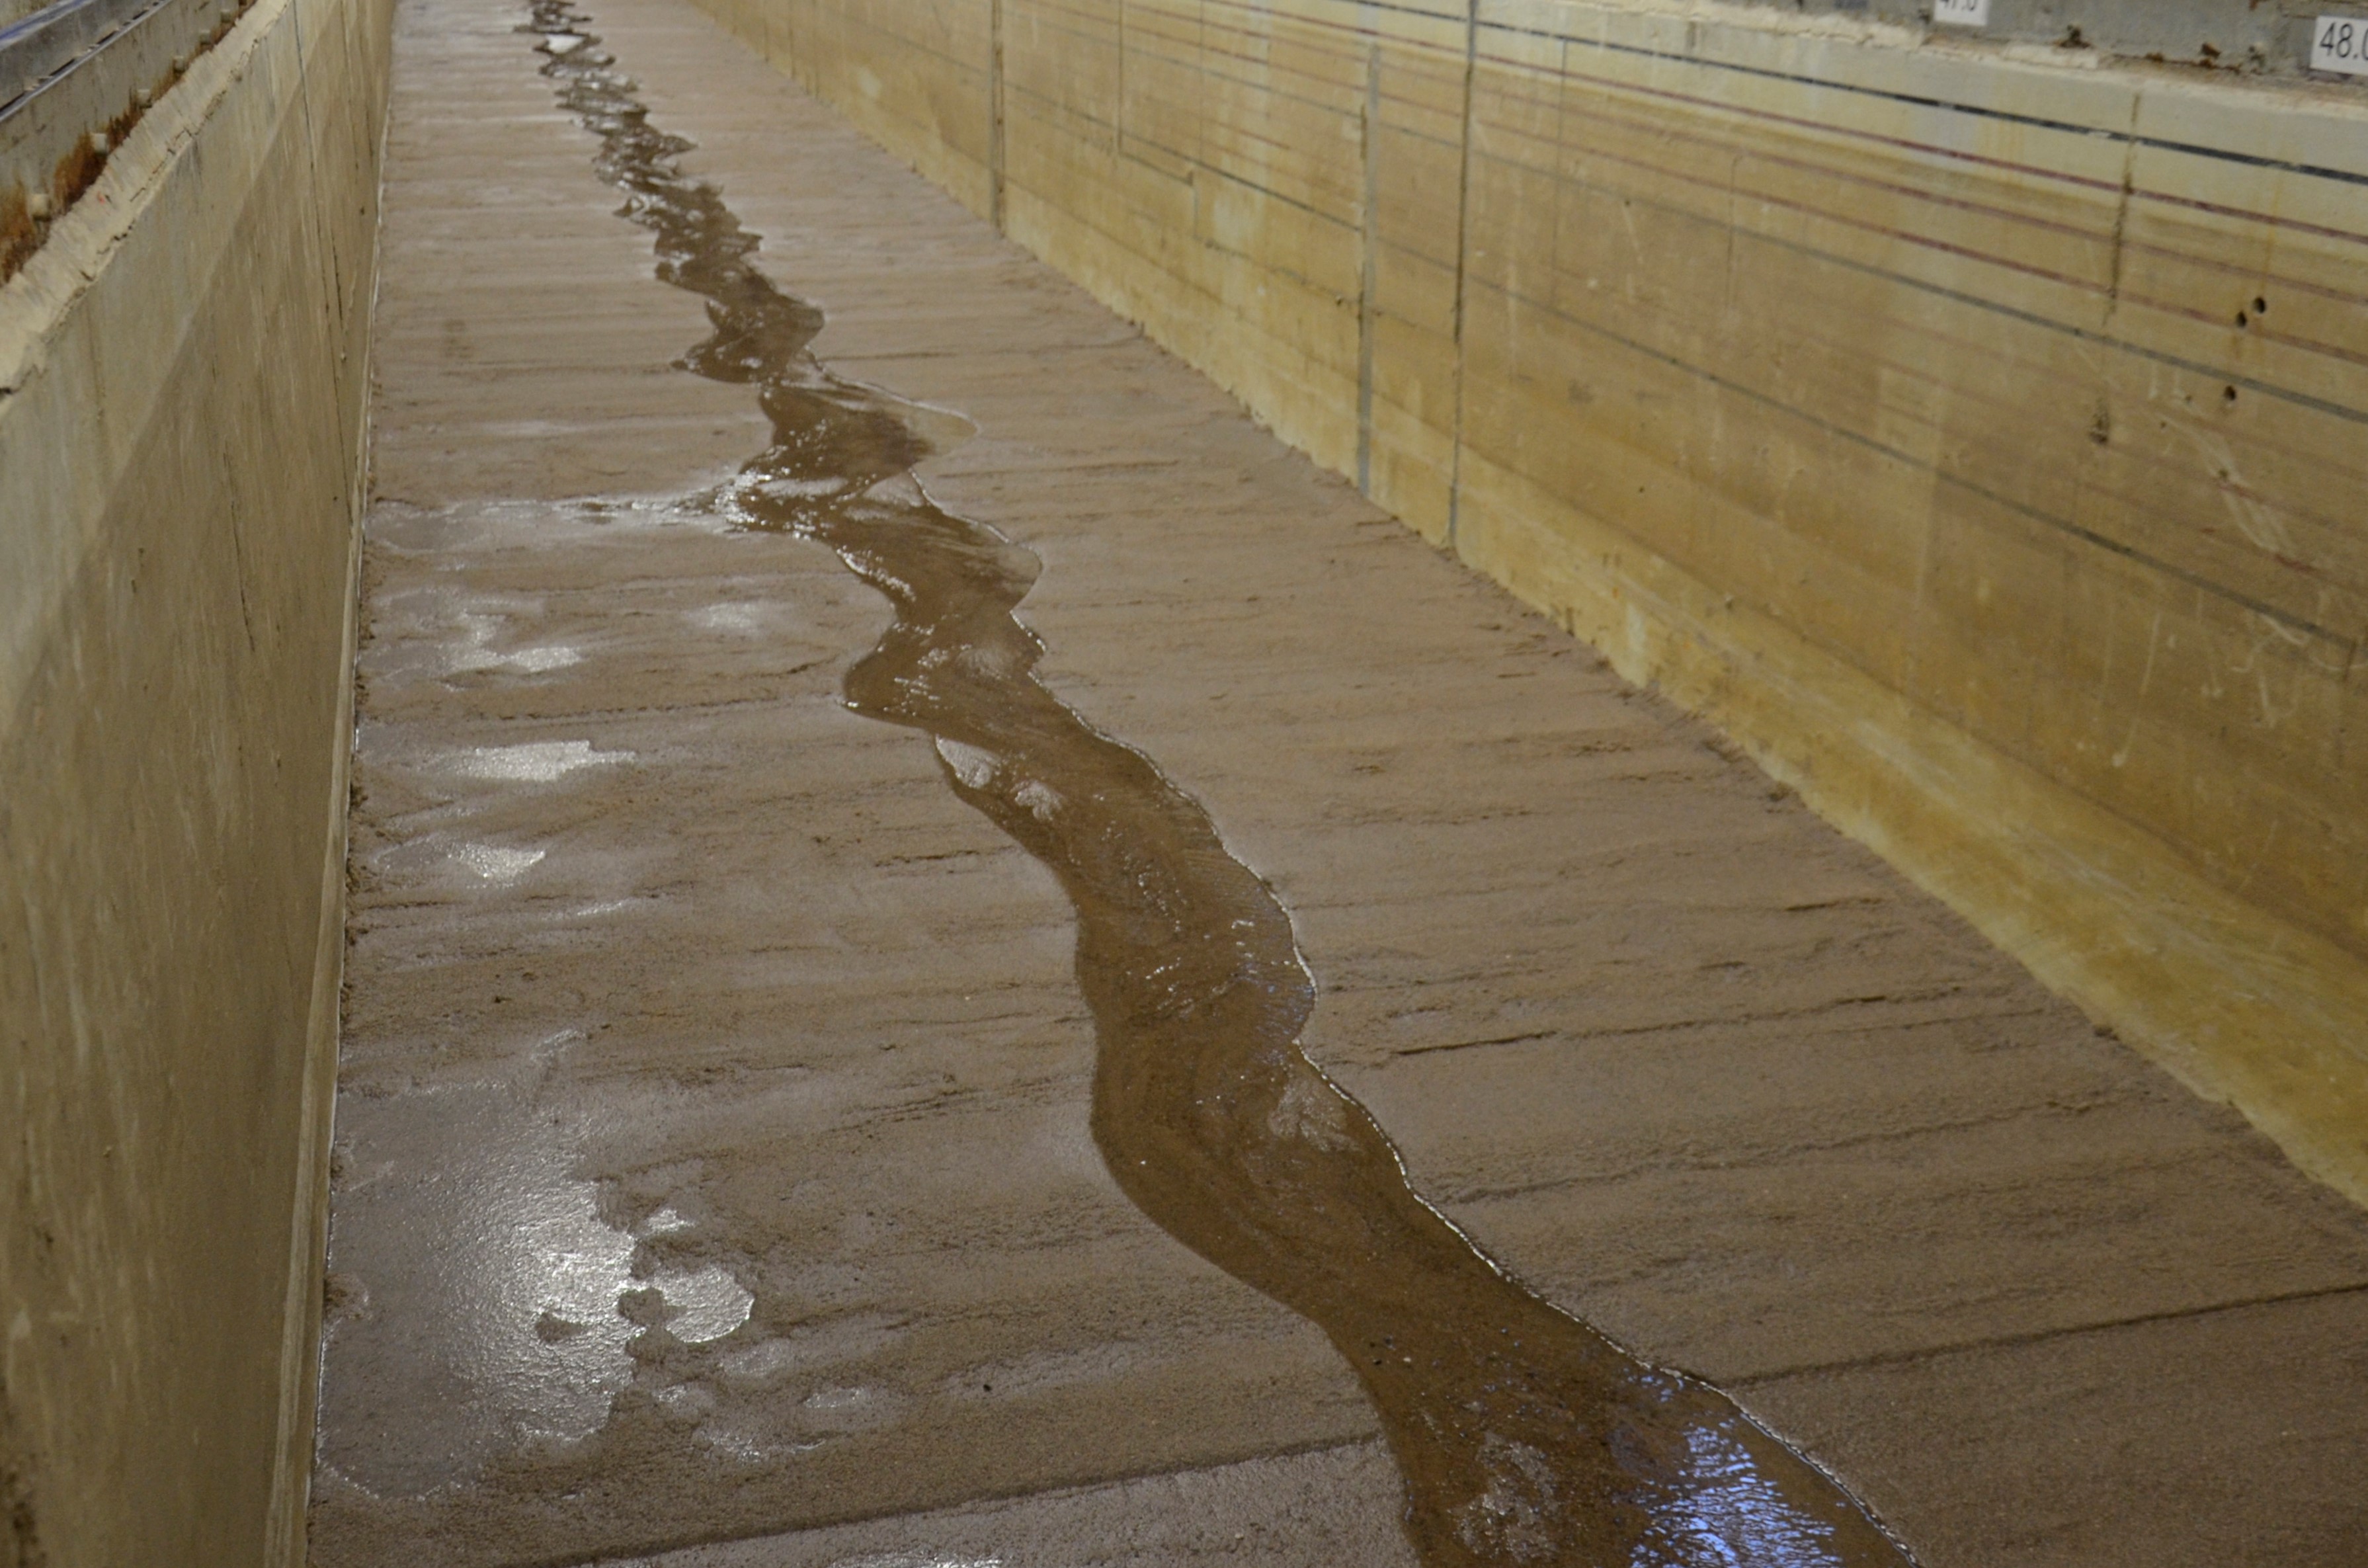 Photo of a braided channel in the SAFL main channel facility